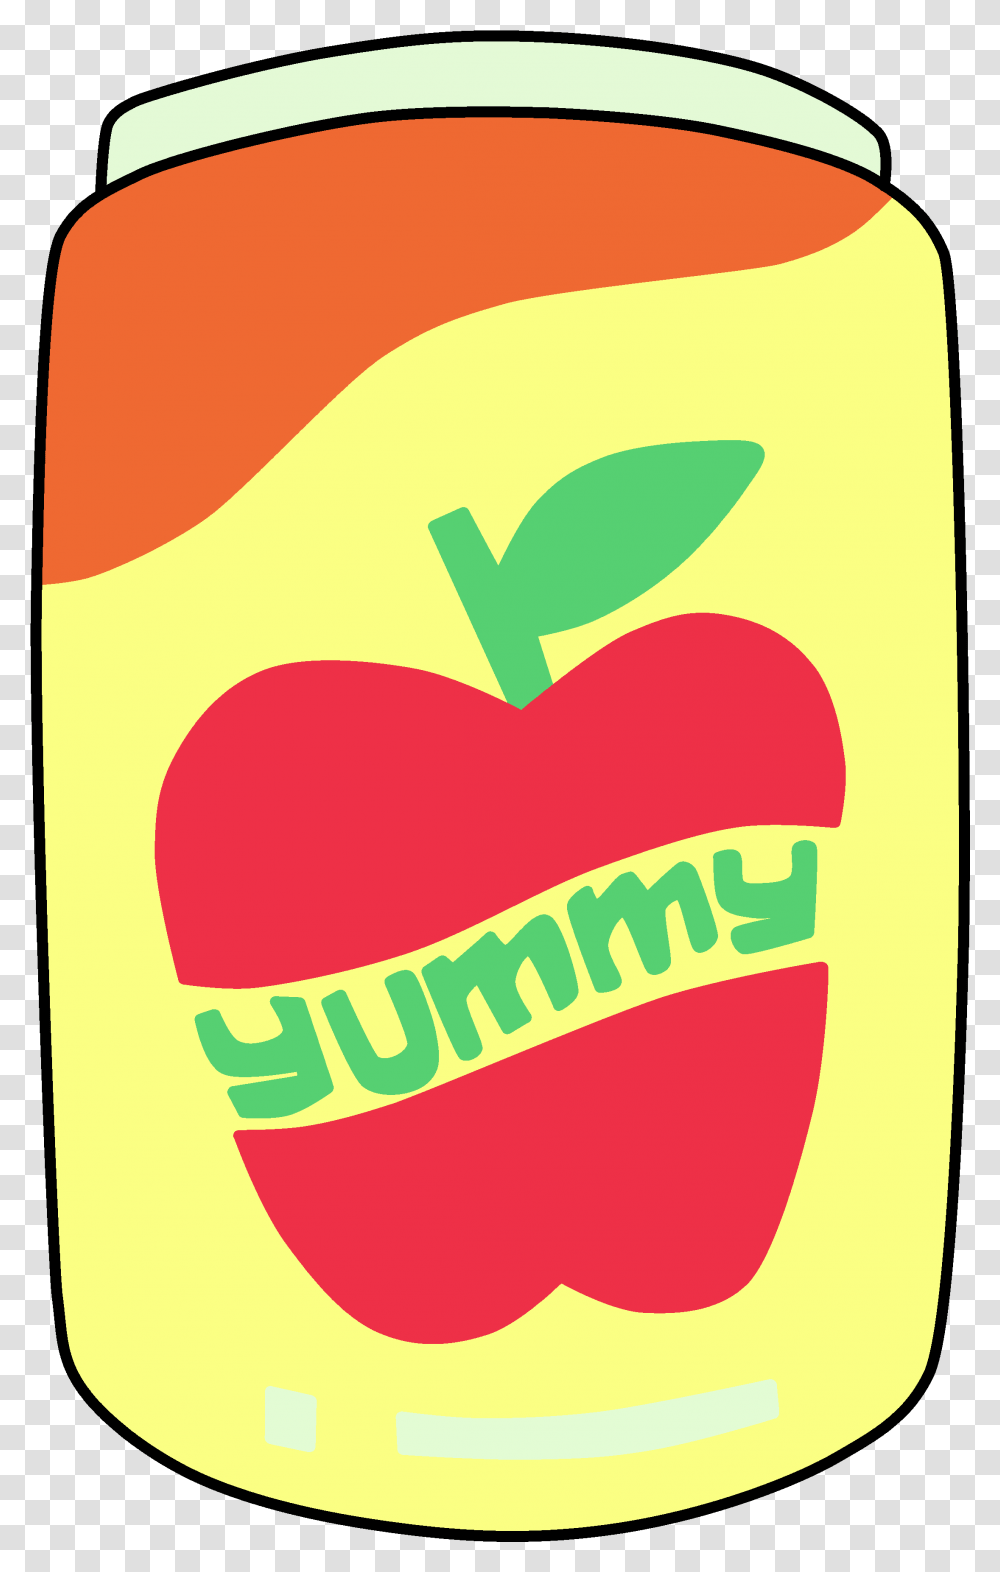 Death Star Shaped As An Apple Clipart Royalty Free Steven Universe Apple Juice, Label, Food, Plant Transparent Png